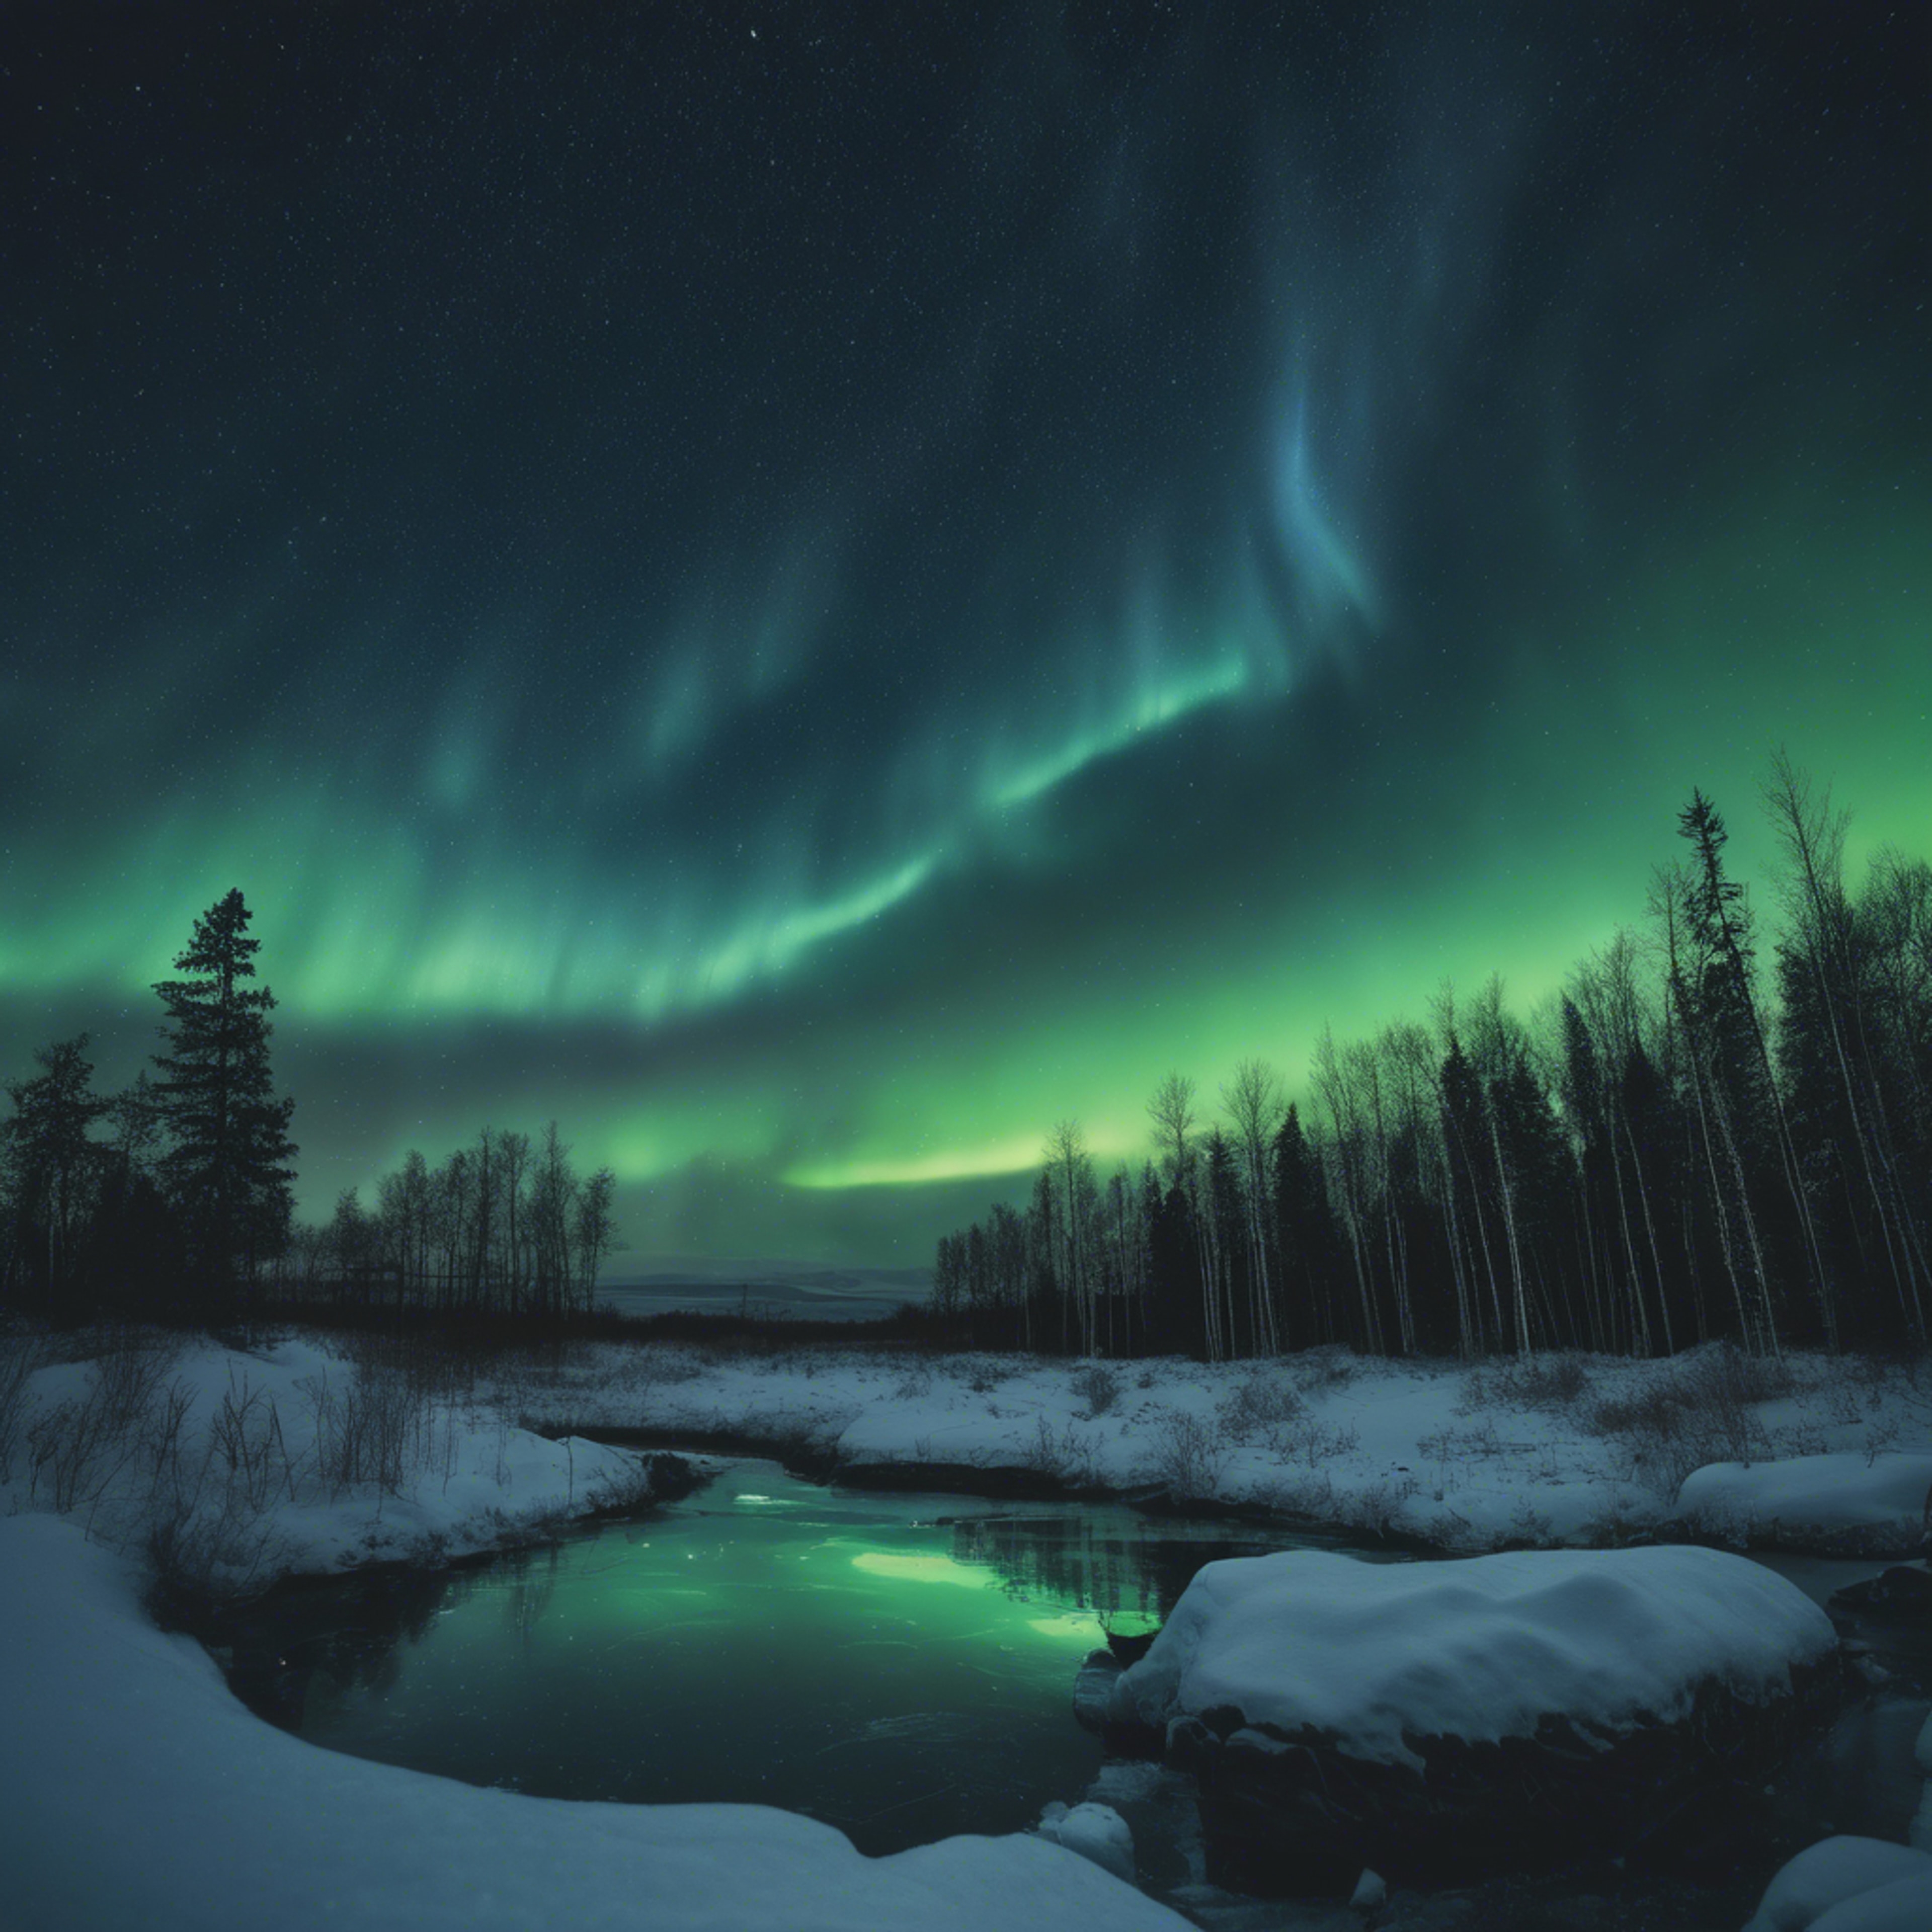 A majestic view of the Northern lights dancing in the night sky, showing various shades of blue and green. Wallpaper[3d23c82dc17f41c8a962]